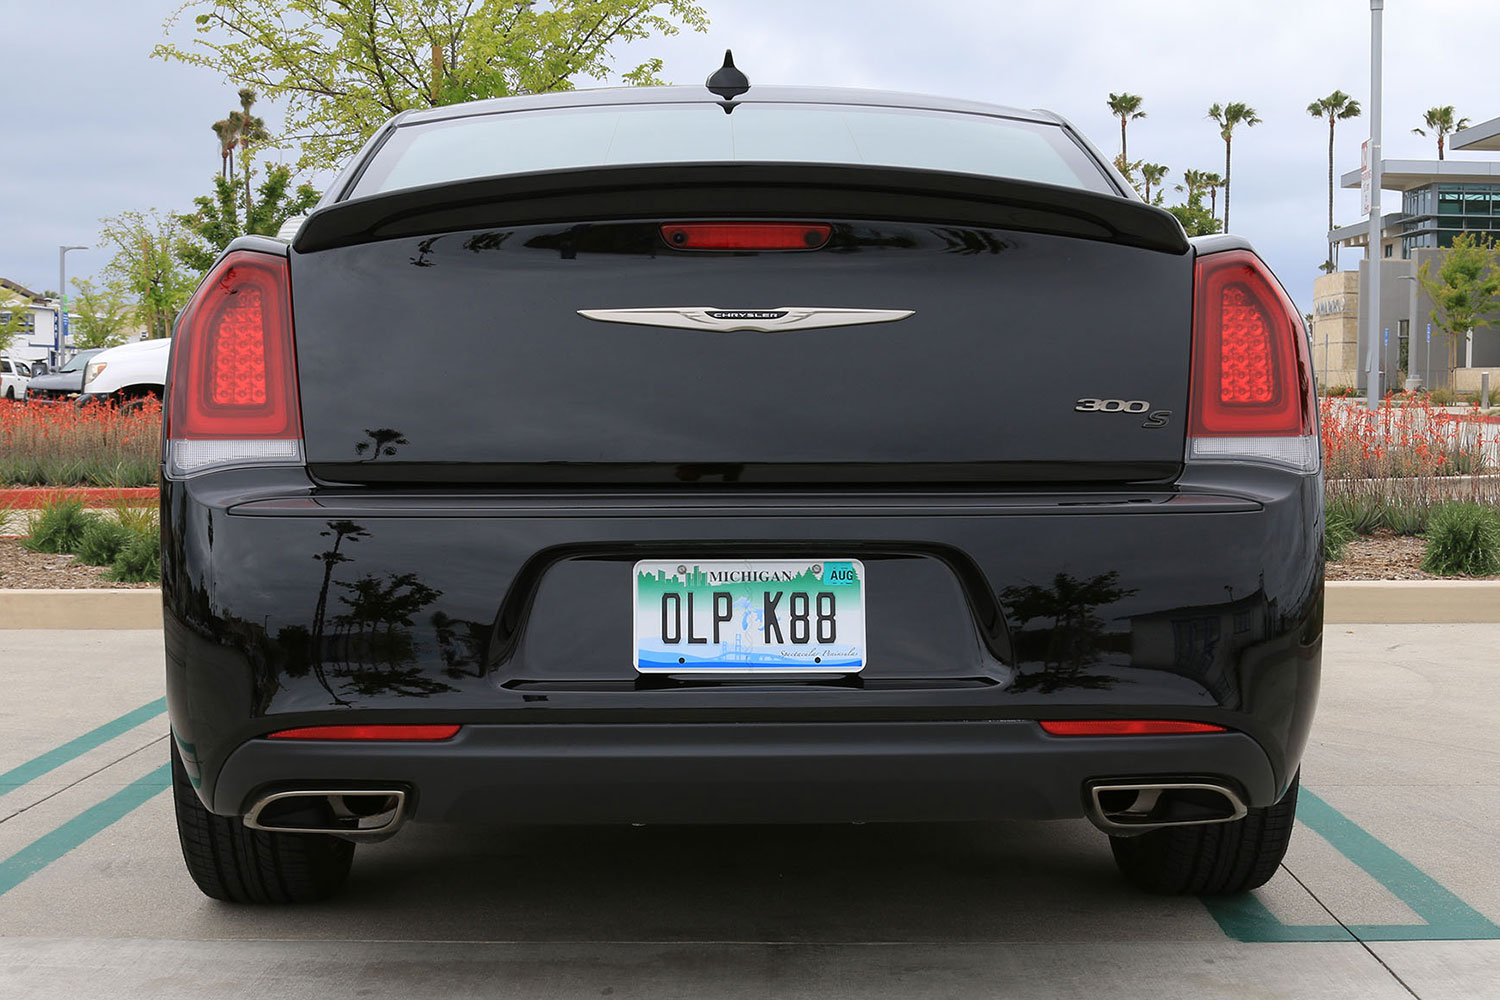 2016 Chrysler 300S Alloy Edition First Drive